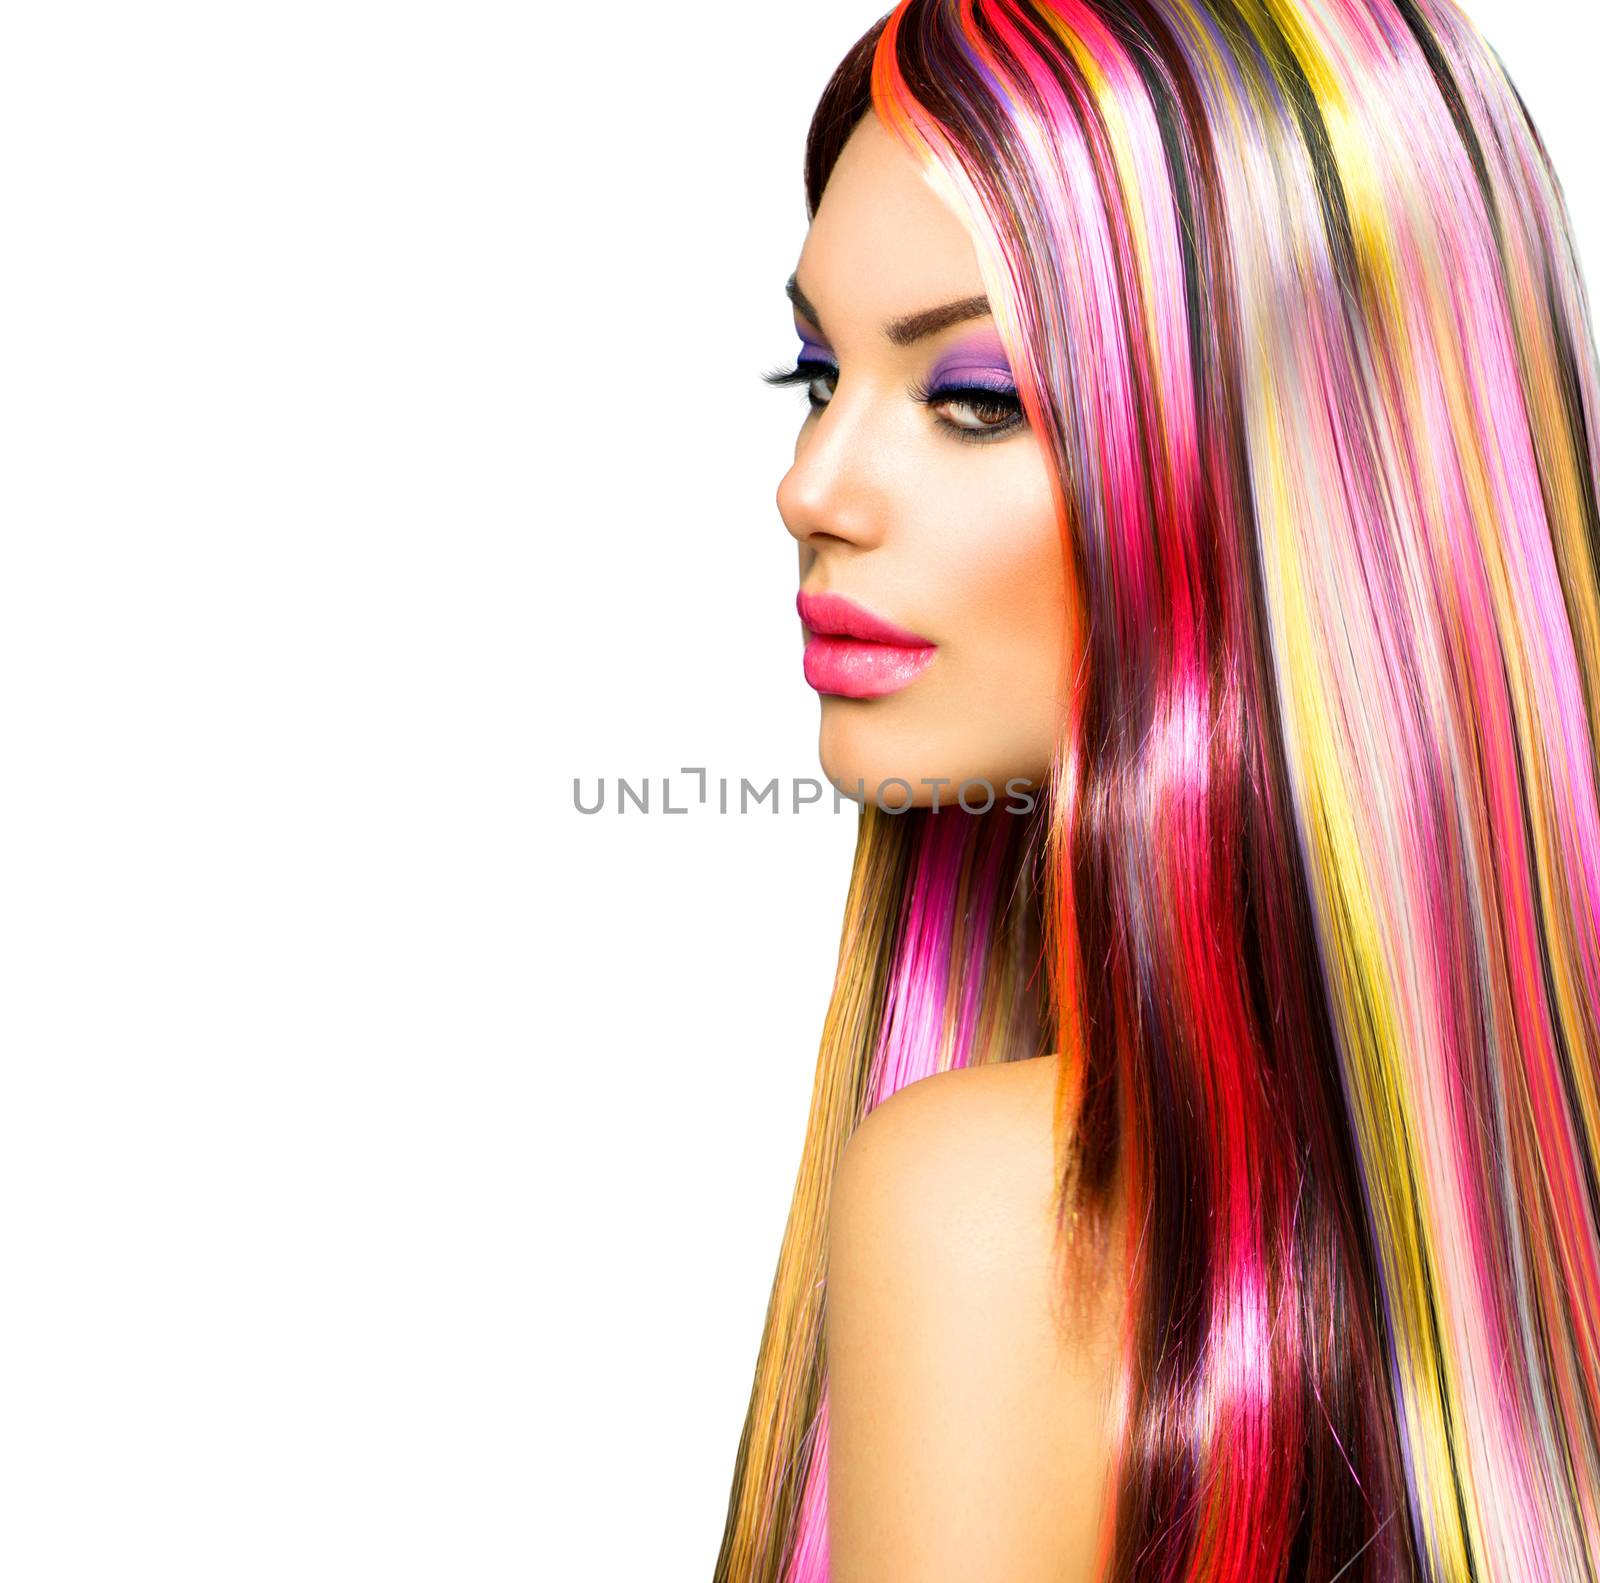 Beauty Fashion Model Girl with Colorful Dyed Hair by SubbotinaA